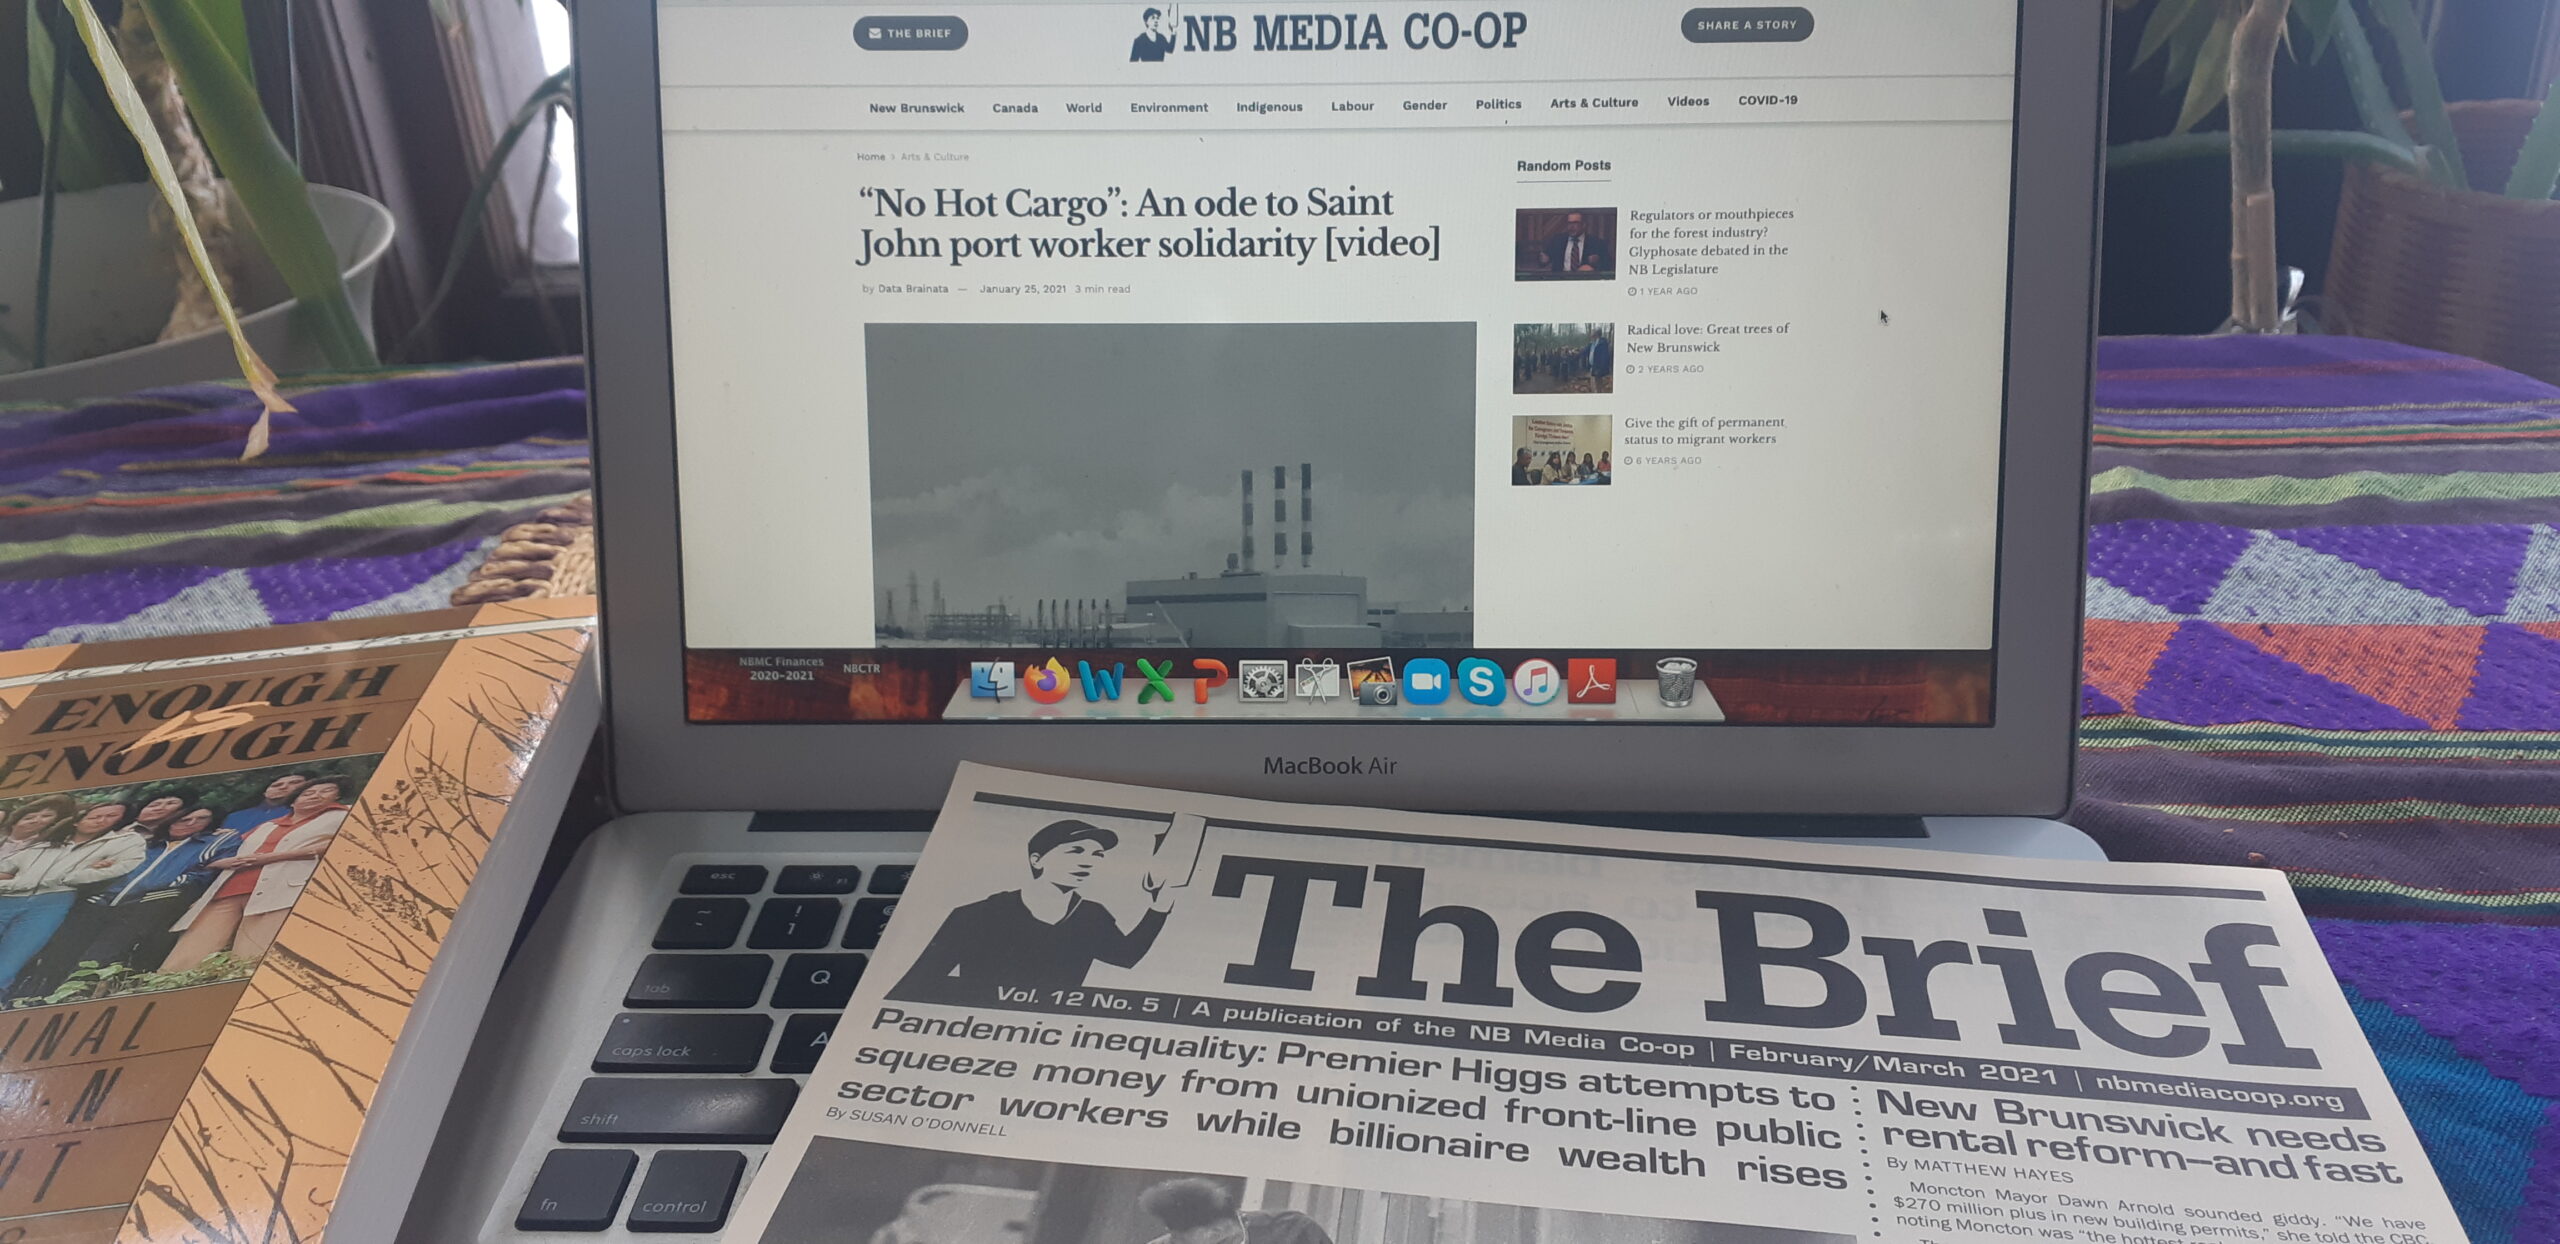 A copy of NB Media Co-op's newsletter "the Brief" sits on the keyboard of a laptop showing the Co-op's website. 